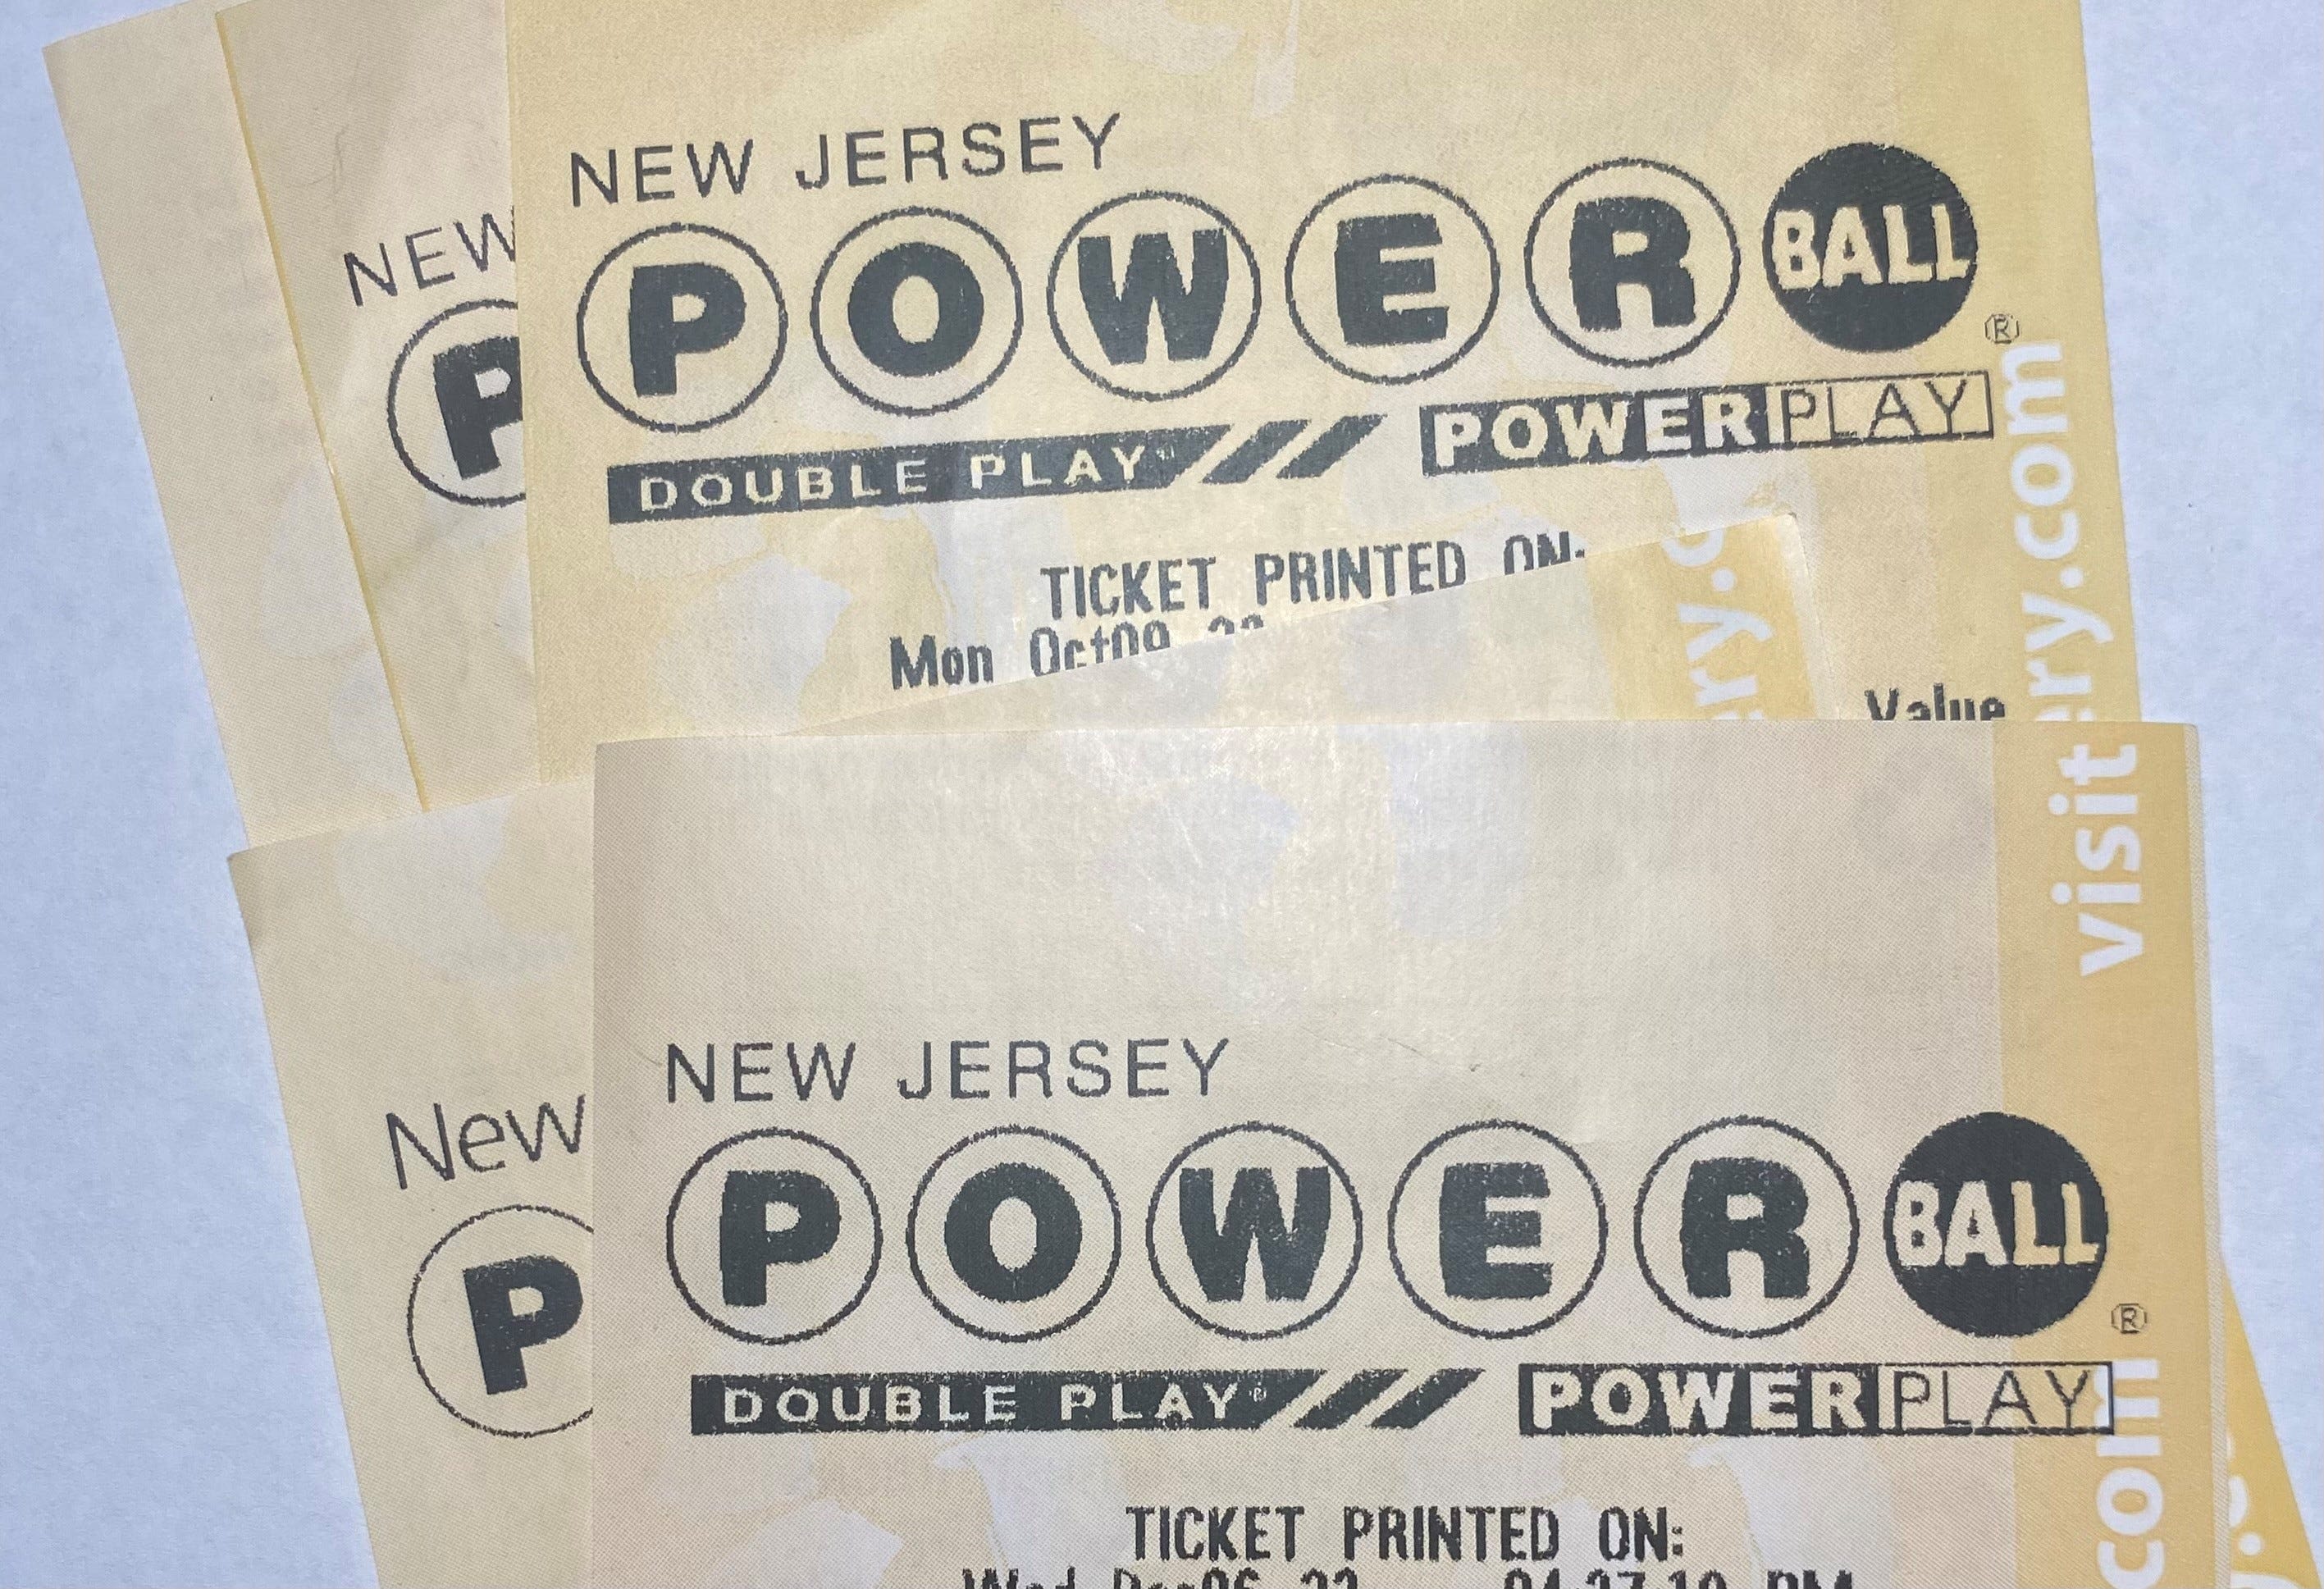 Powerball lottery drawing for Wednesday, July 24 delayed due to technical difficulties